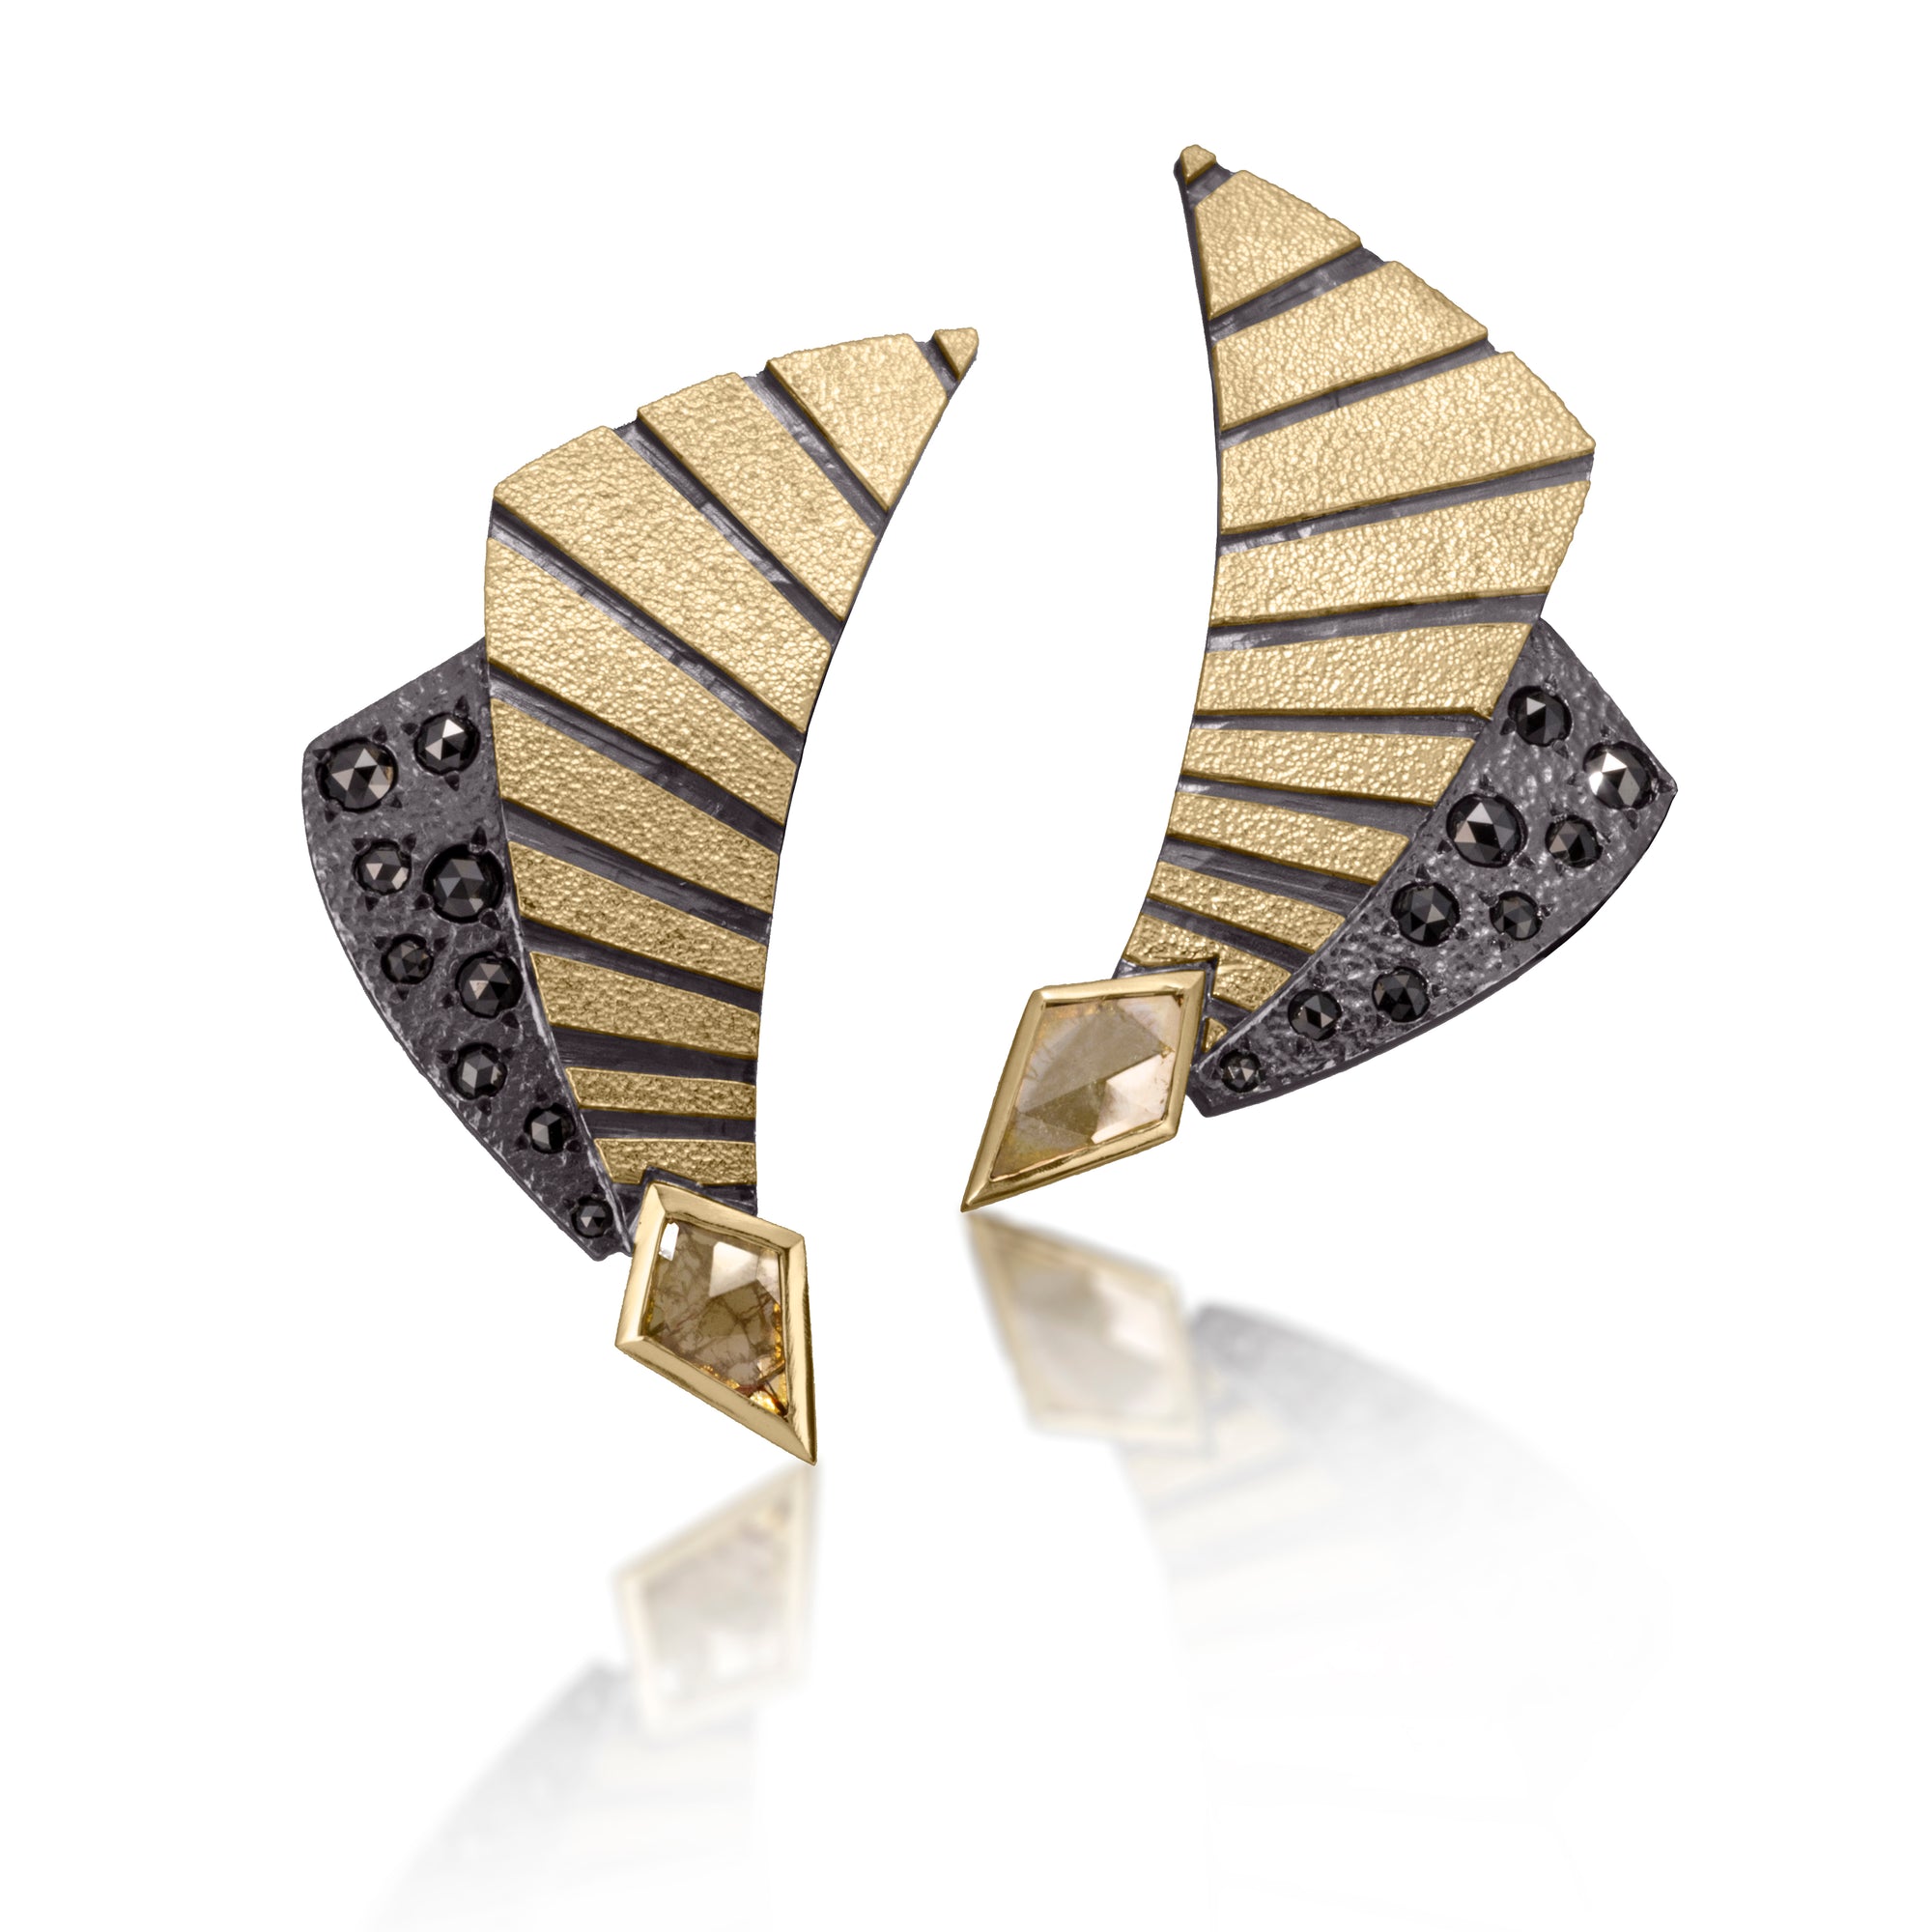 With their energetic gesture and elegant curve, this one of a kind variation of Stripe E9 will put a point on any outfit. Hand fabricated, stipple textured and engraved mixed metals, with 14k gold posts. These post earrings are playfully graphic with an oxidized accent, set with black diamonds and golden yellow diamond shaped diamond slices.